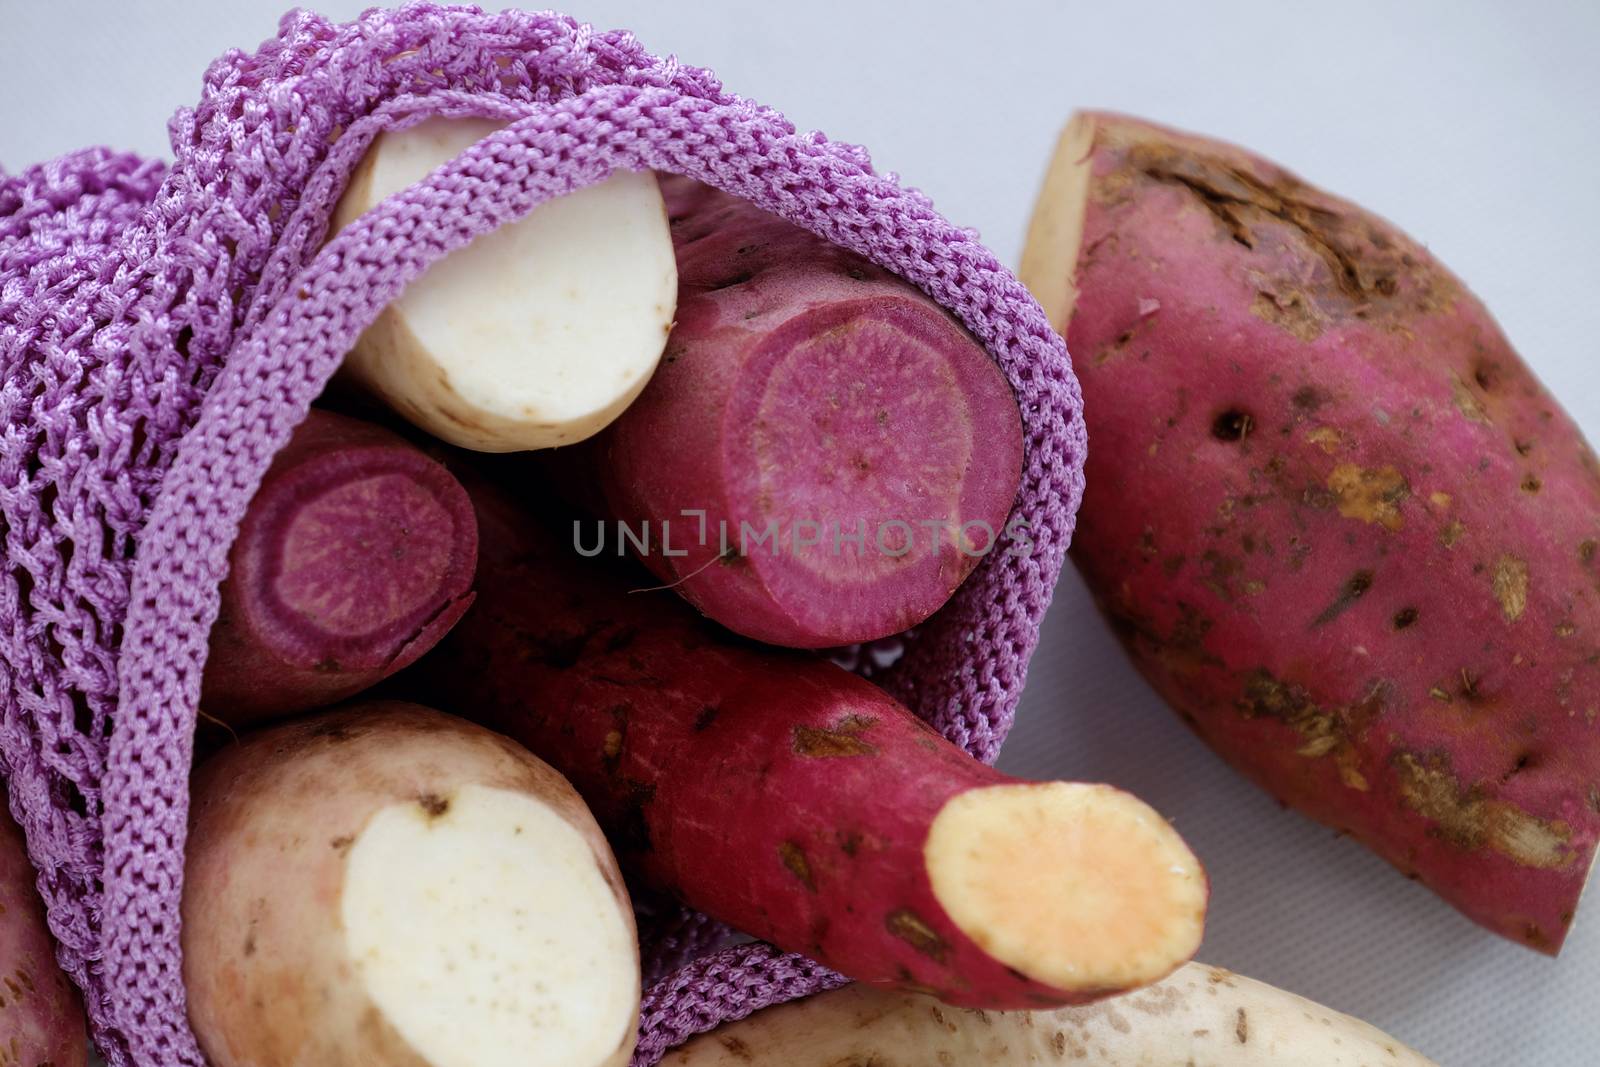 Diversity sweet potato on white background, healthy food that rich fiber, vitamin, starch and mineral, this cereal absorb toxin, fat so good for digestive system